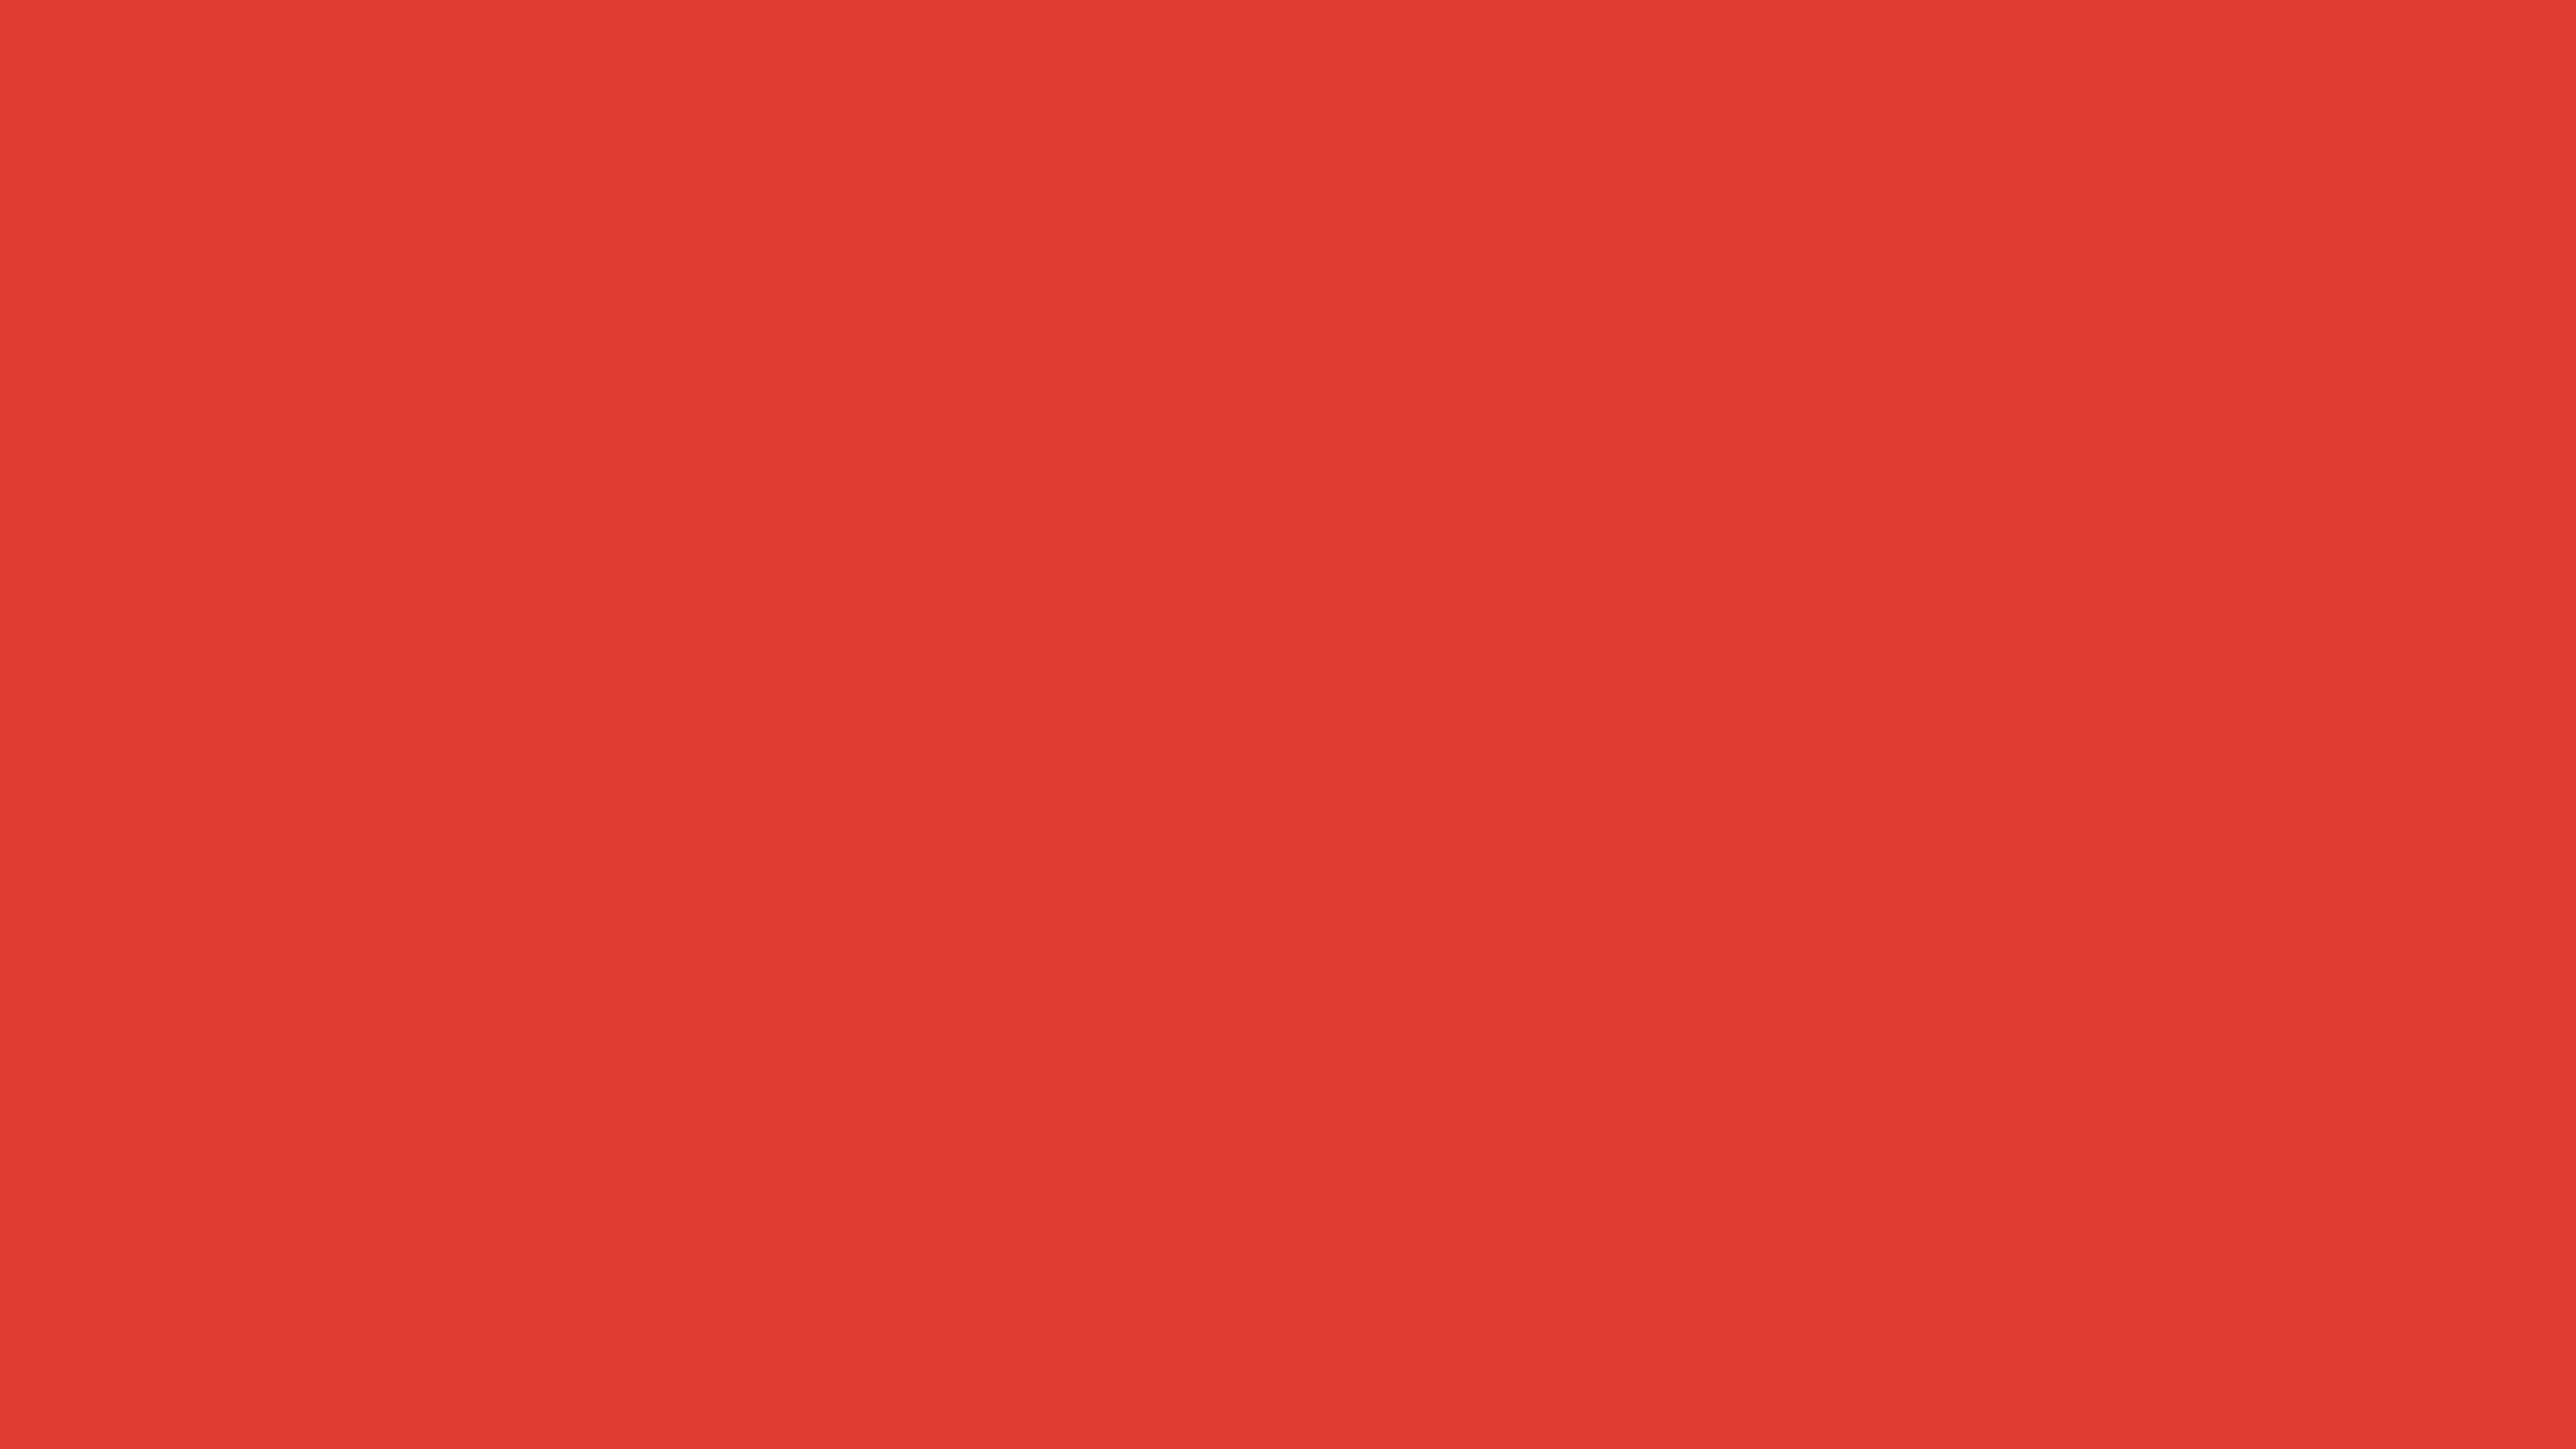 5120x2880 CG Red Solid Color Background